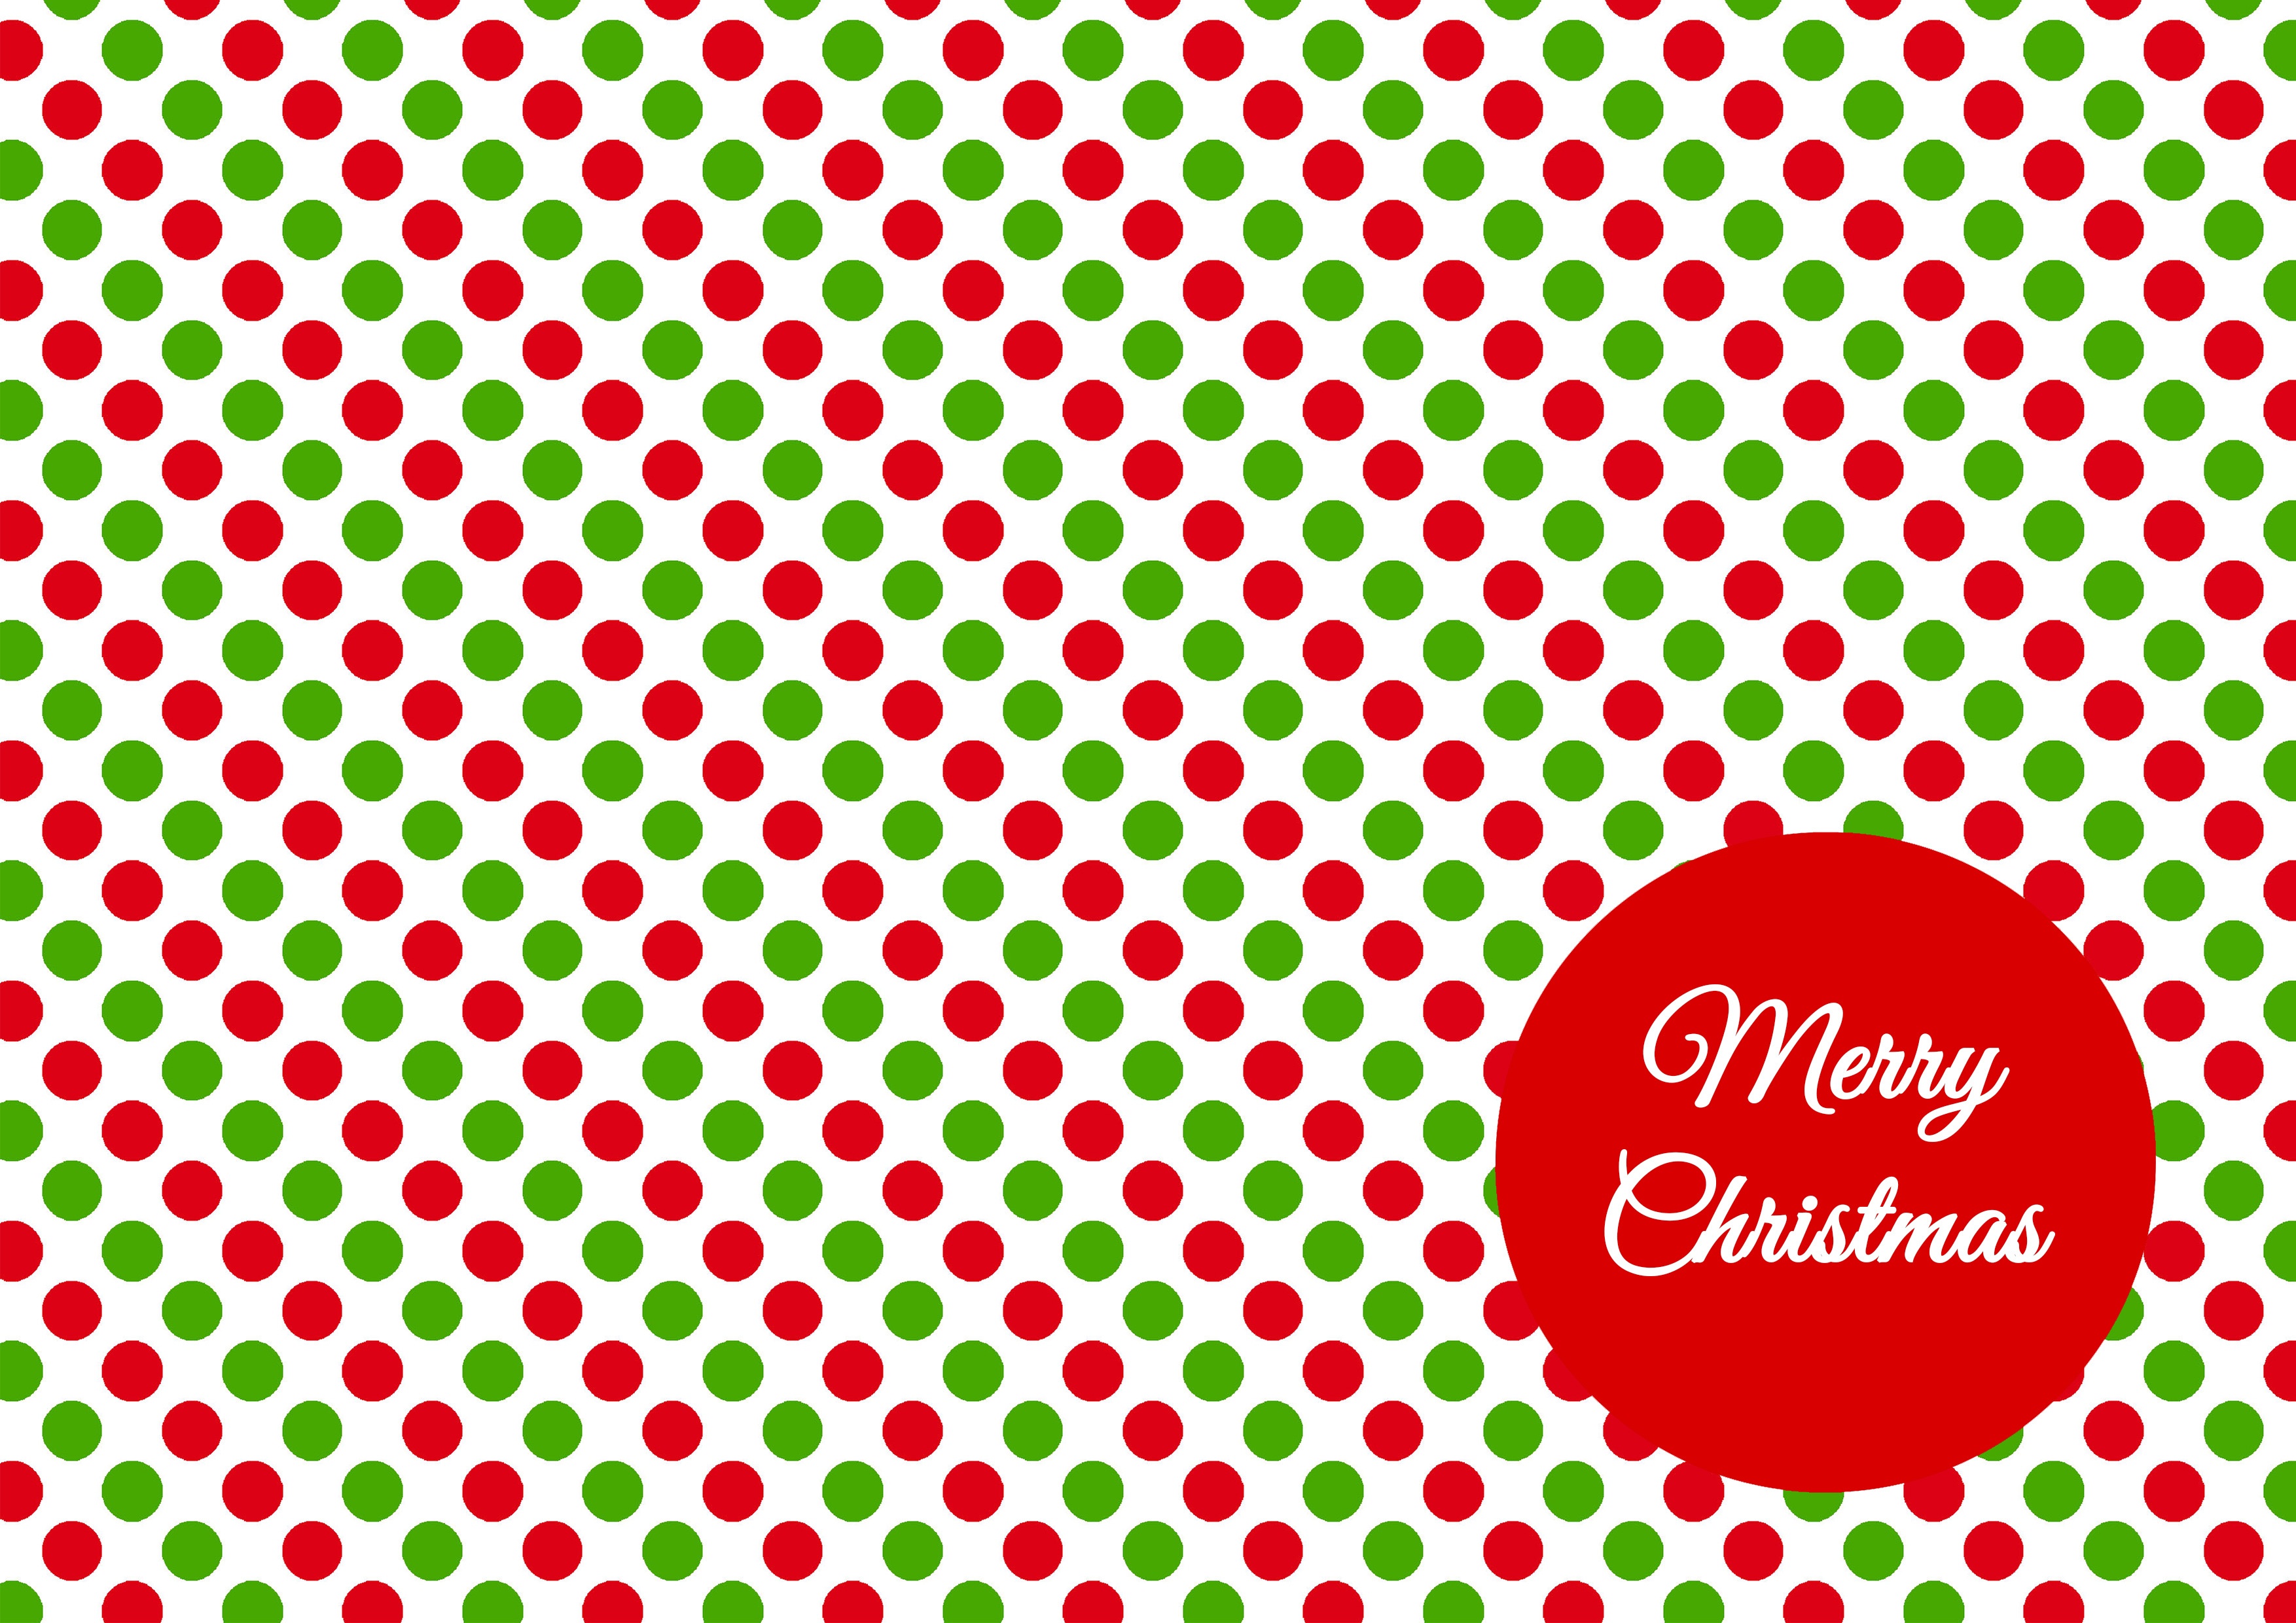 Free Printable Christmas Backgrounds – Happy Holidays! - Free Printable Christmas Backgrounds